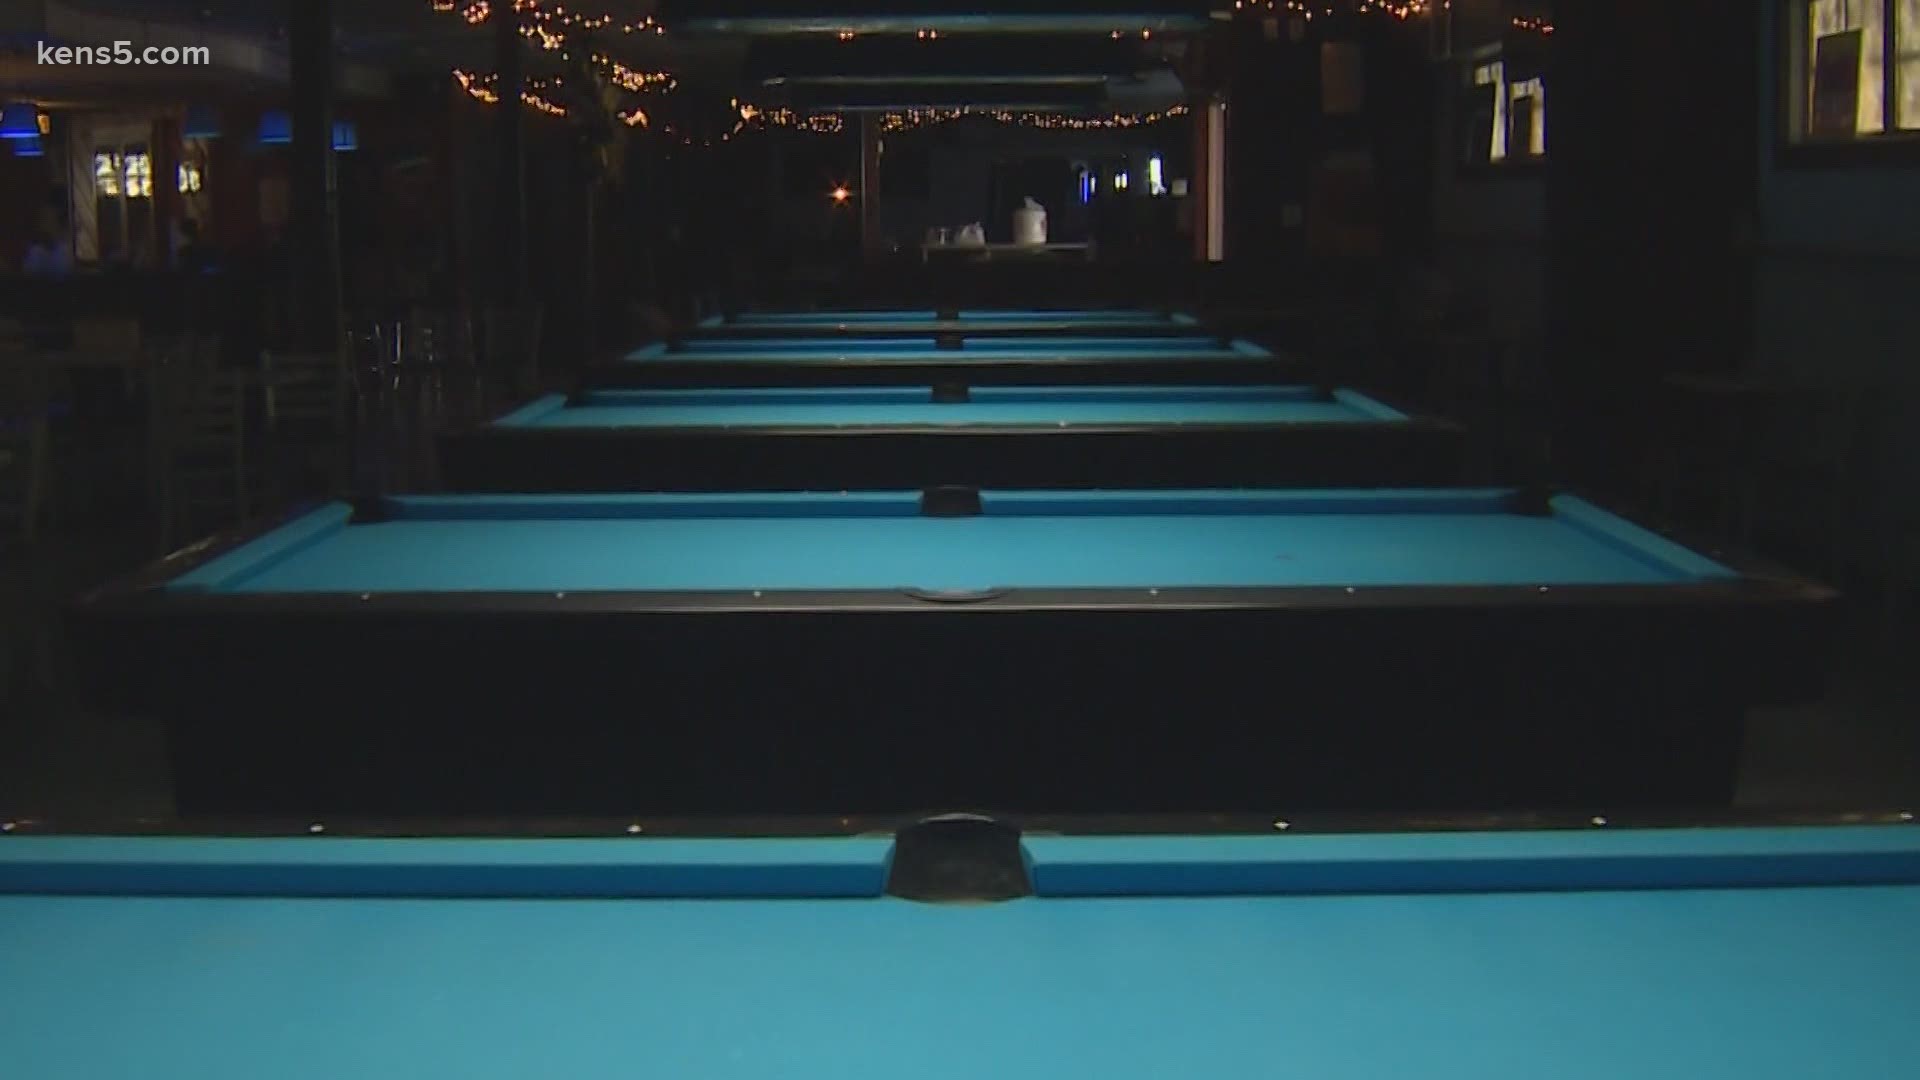 A pool hall that has welcomed generations of San Antonians is hoping to see the next one. The had a plate sale, and are raising money on GoFundMe.